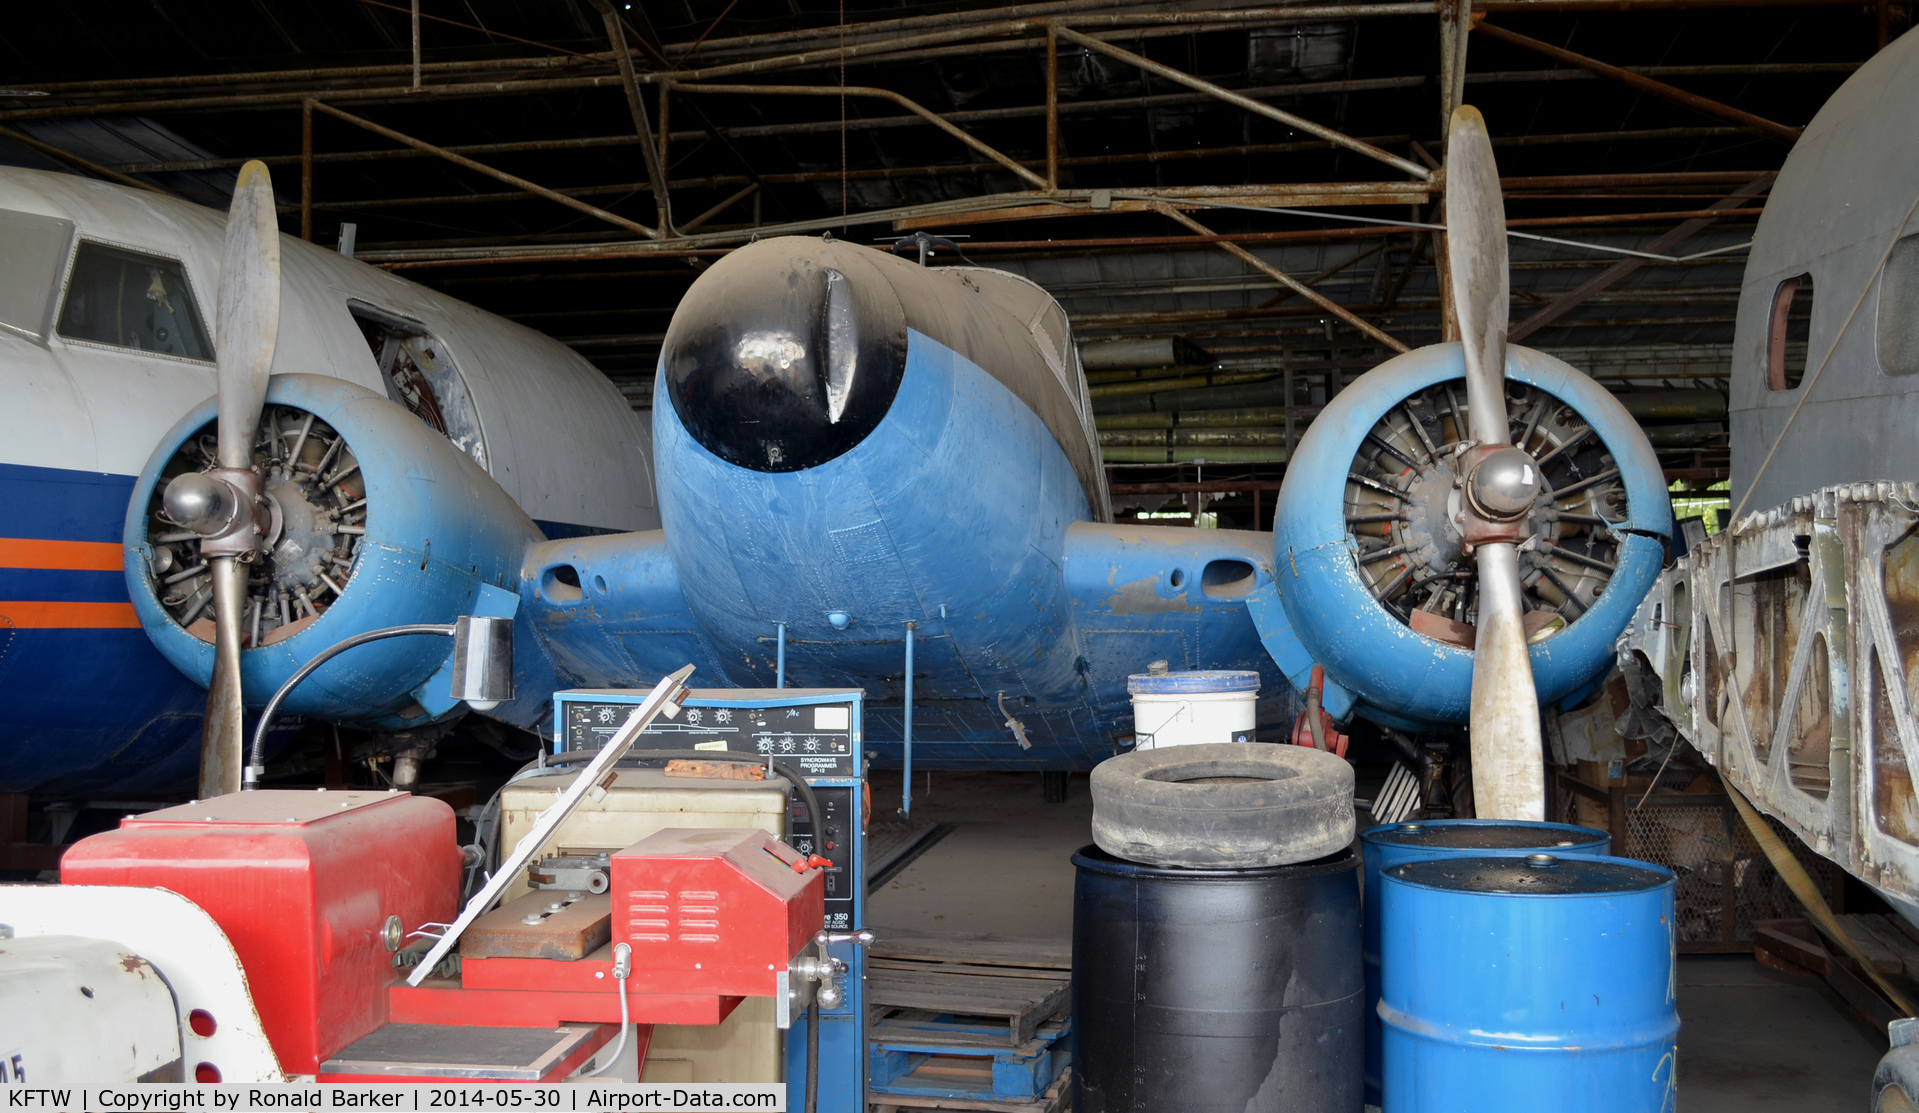 Fort Worth Meacham International Airport (FTW) - Twin blue aircraft at Vintage Flight Museum